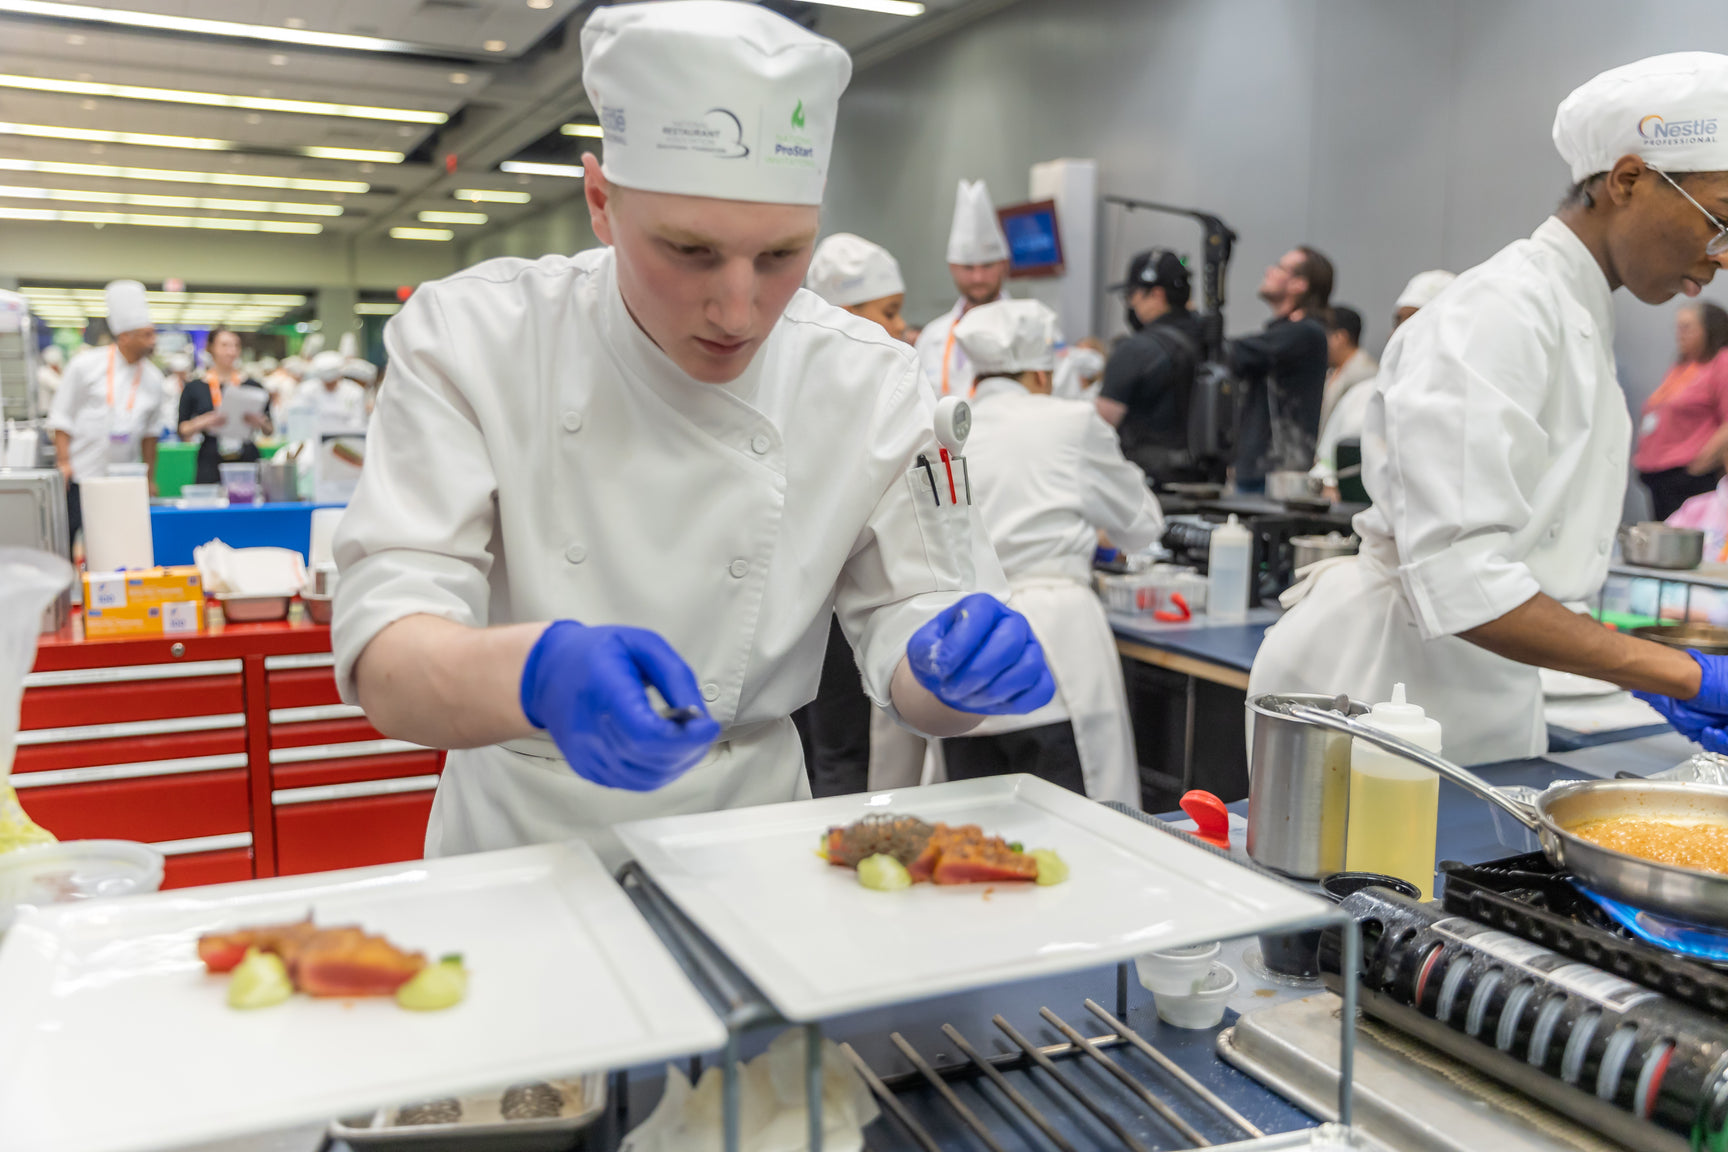 Culinary chefs plating and cooking in a kitchen with blue gloves on